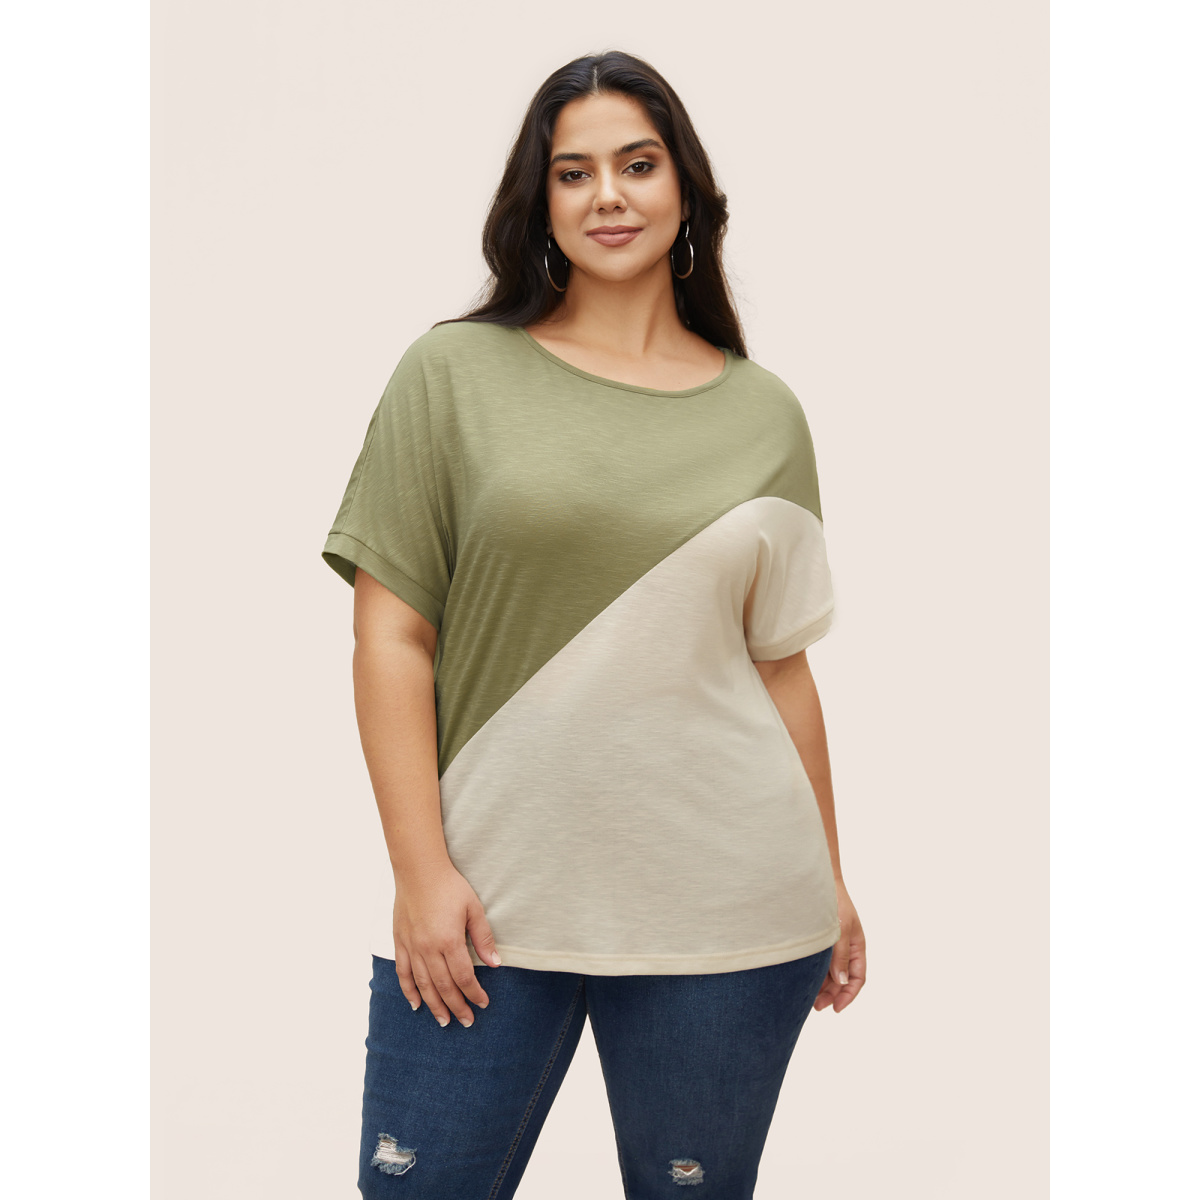 

Plus Size Two Tone Heather Batwing Sleeve T-shirt ArmyGreen Women Casual Contrast Round Neck Everyday T-shirts BloomChic